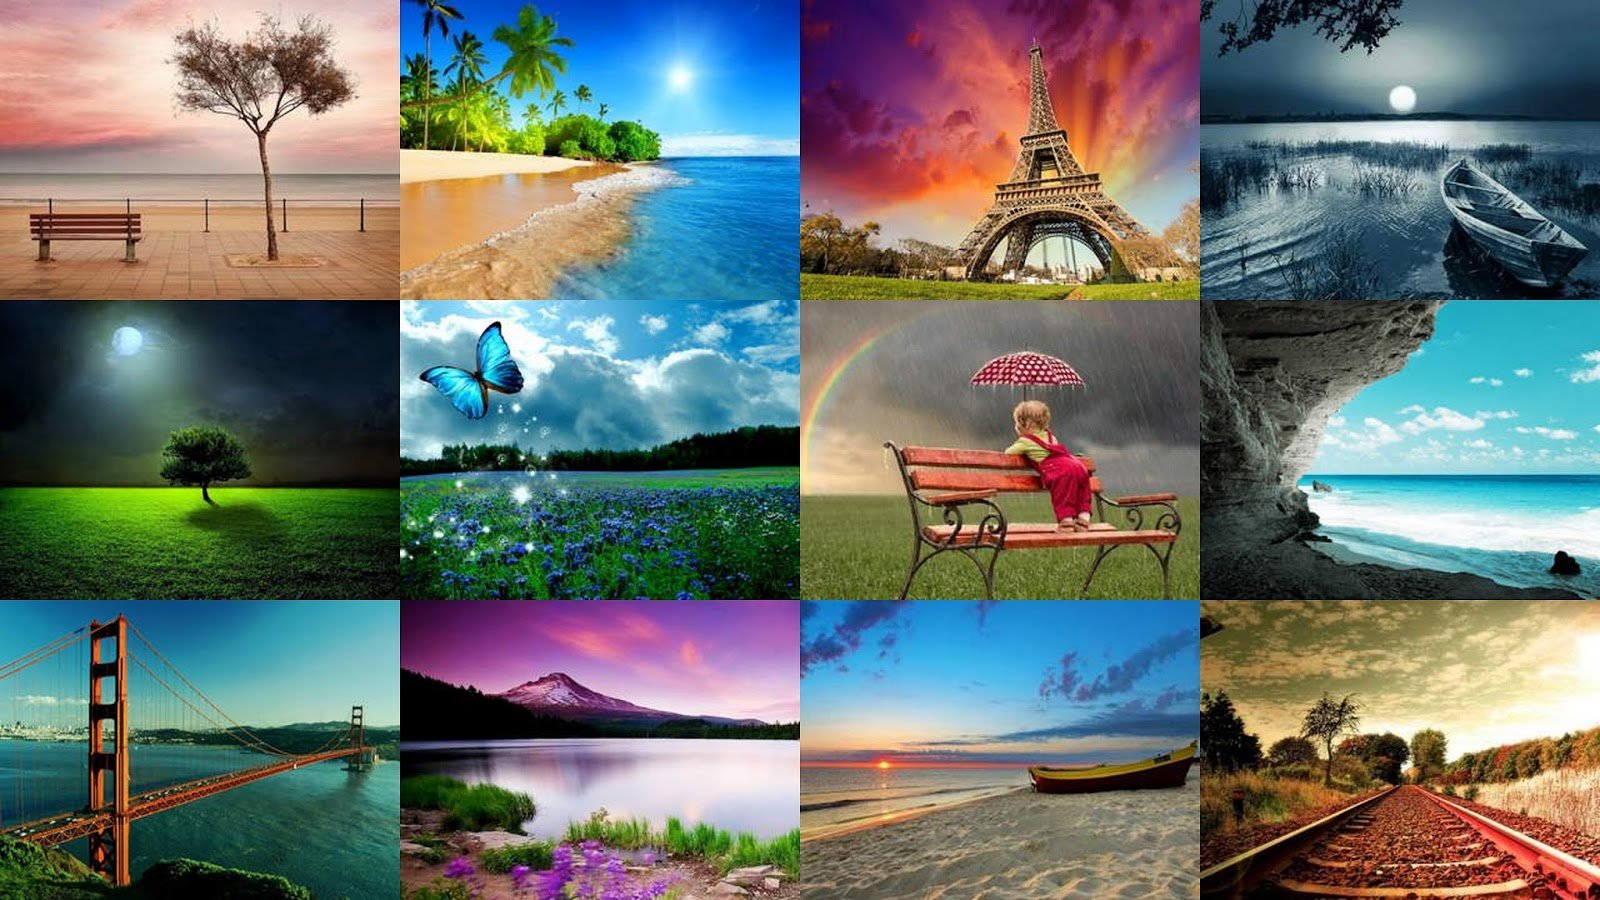  Nature Wallpapers Pack Pack Contains 100 HD Pics   Wallpaper Packs 1600x900